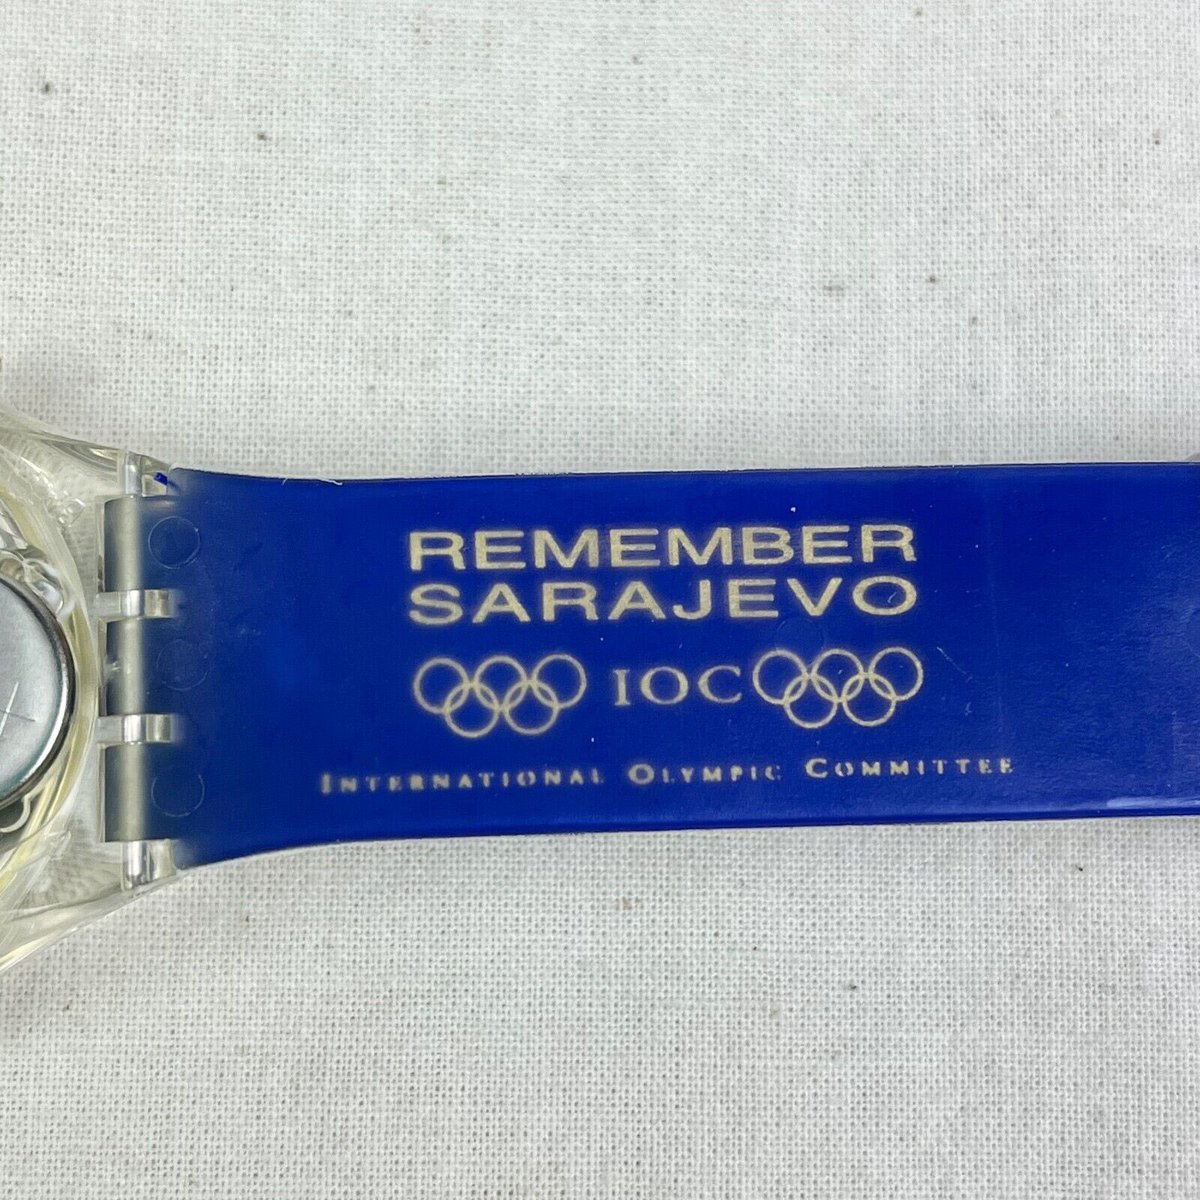 During the Winter Olympics in Lillehammer 1994, Swatch made a special edition watch in honor of 1894-1994 100 Years of the Olympic Movement. The watch strap had a special engraving for suffering of Sarajevo as the city was under siege.

Remember Sarajevo
#Lillehammer1994